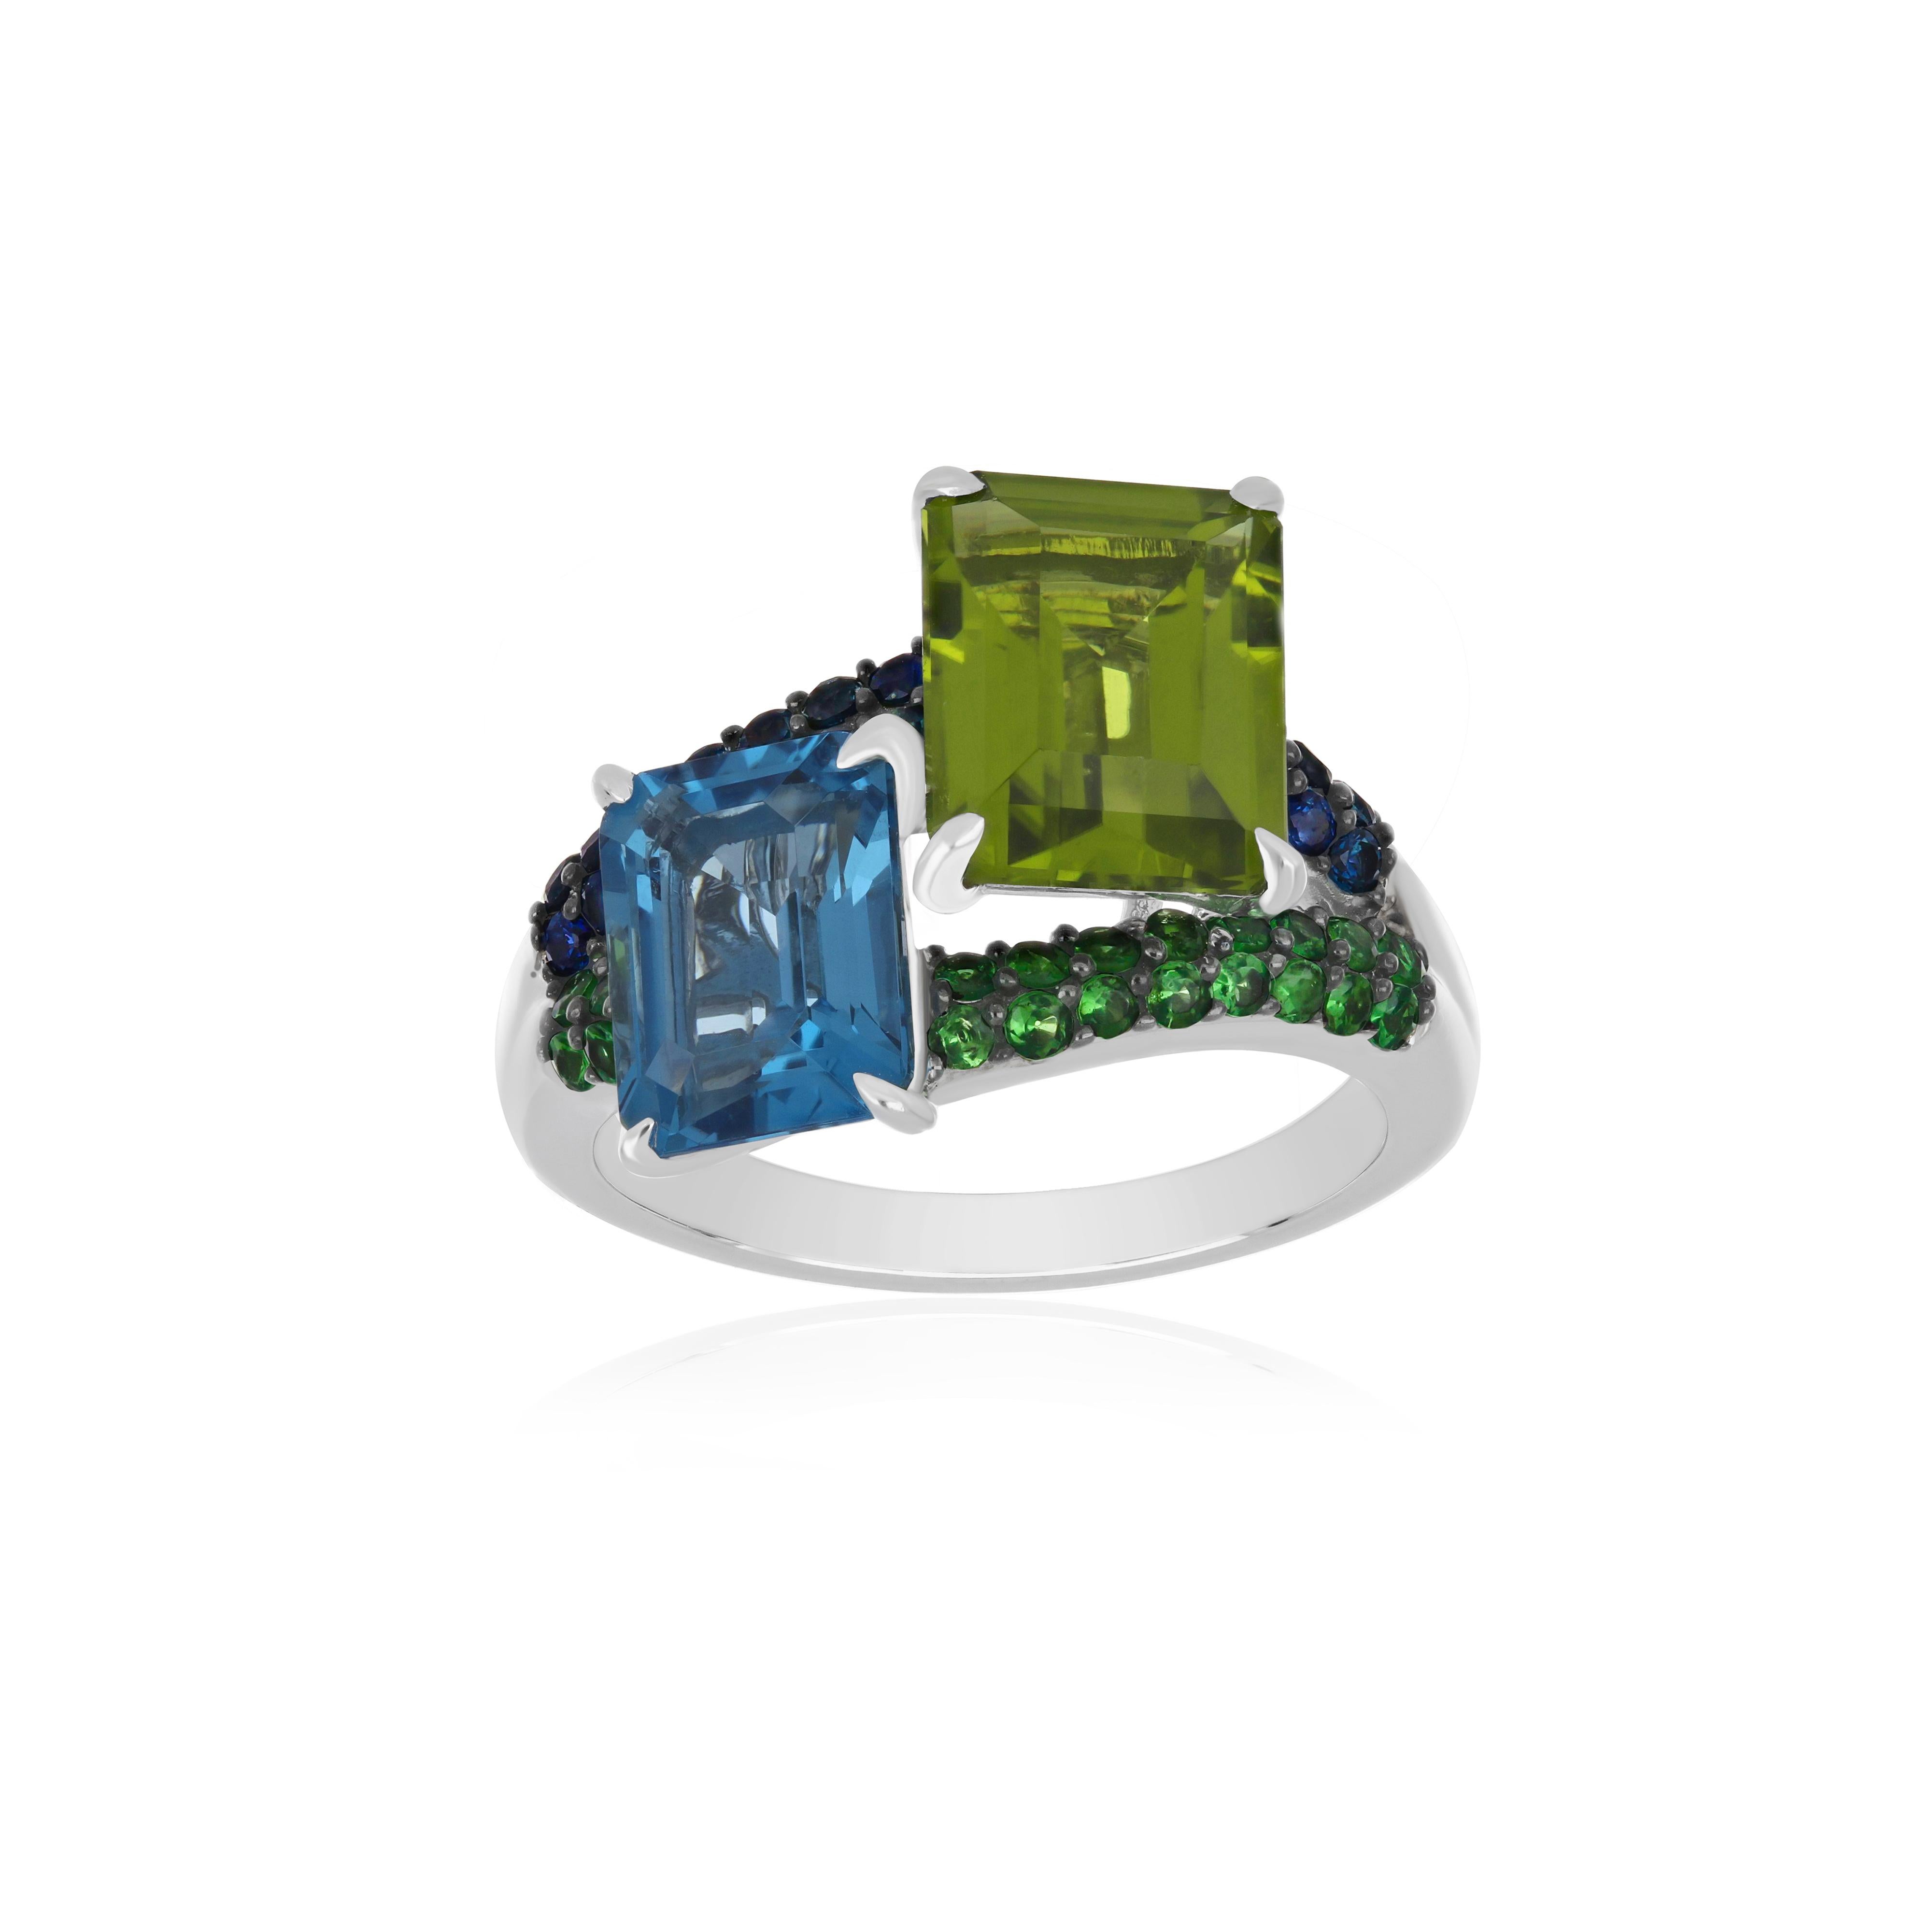 Elegant and exquisitely detailed 14 Karat White Gold Ring, studded with twin Octagon cut Swiss Blue Topaz weight 2.82Cts (approx.) & Peridot weight 3.30Cts (approx.) accented with 1.50 mm Blue Sapphire Weight 0.40Cts (approx.) & Tsavorite Weight